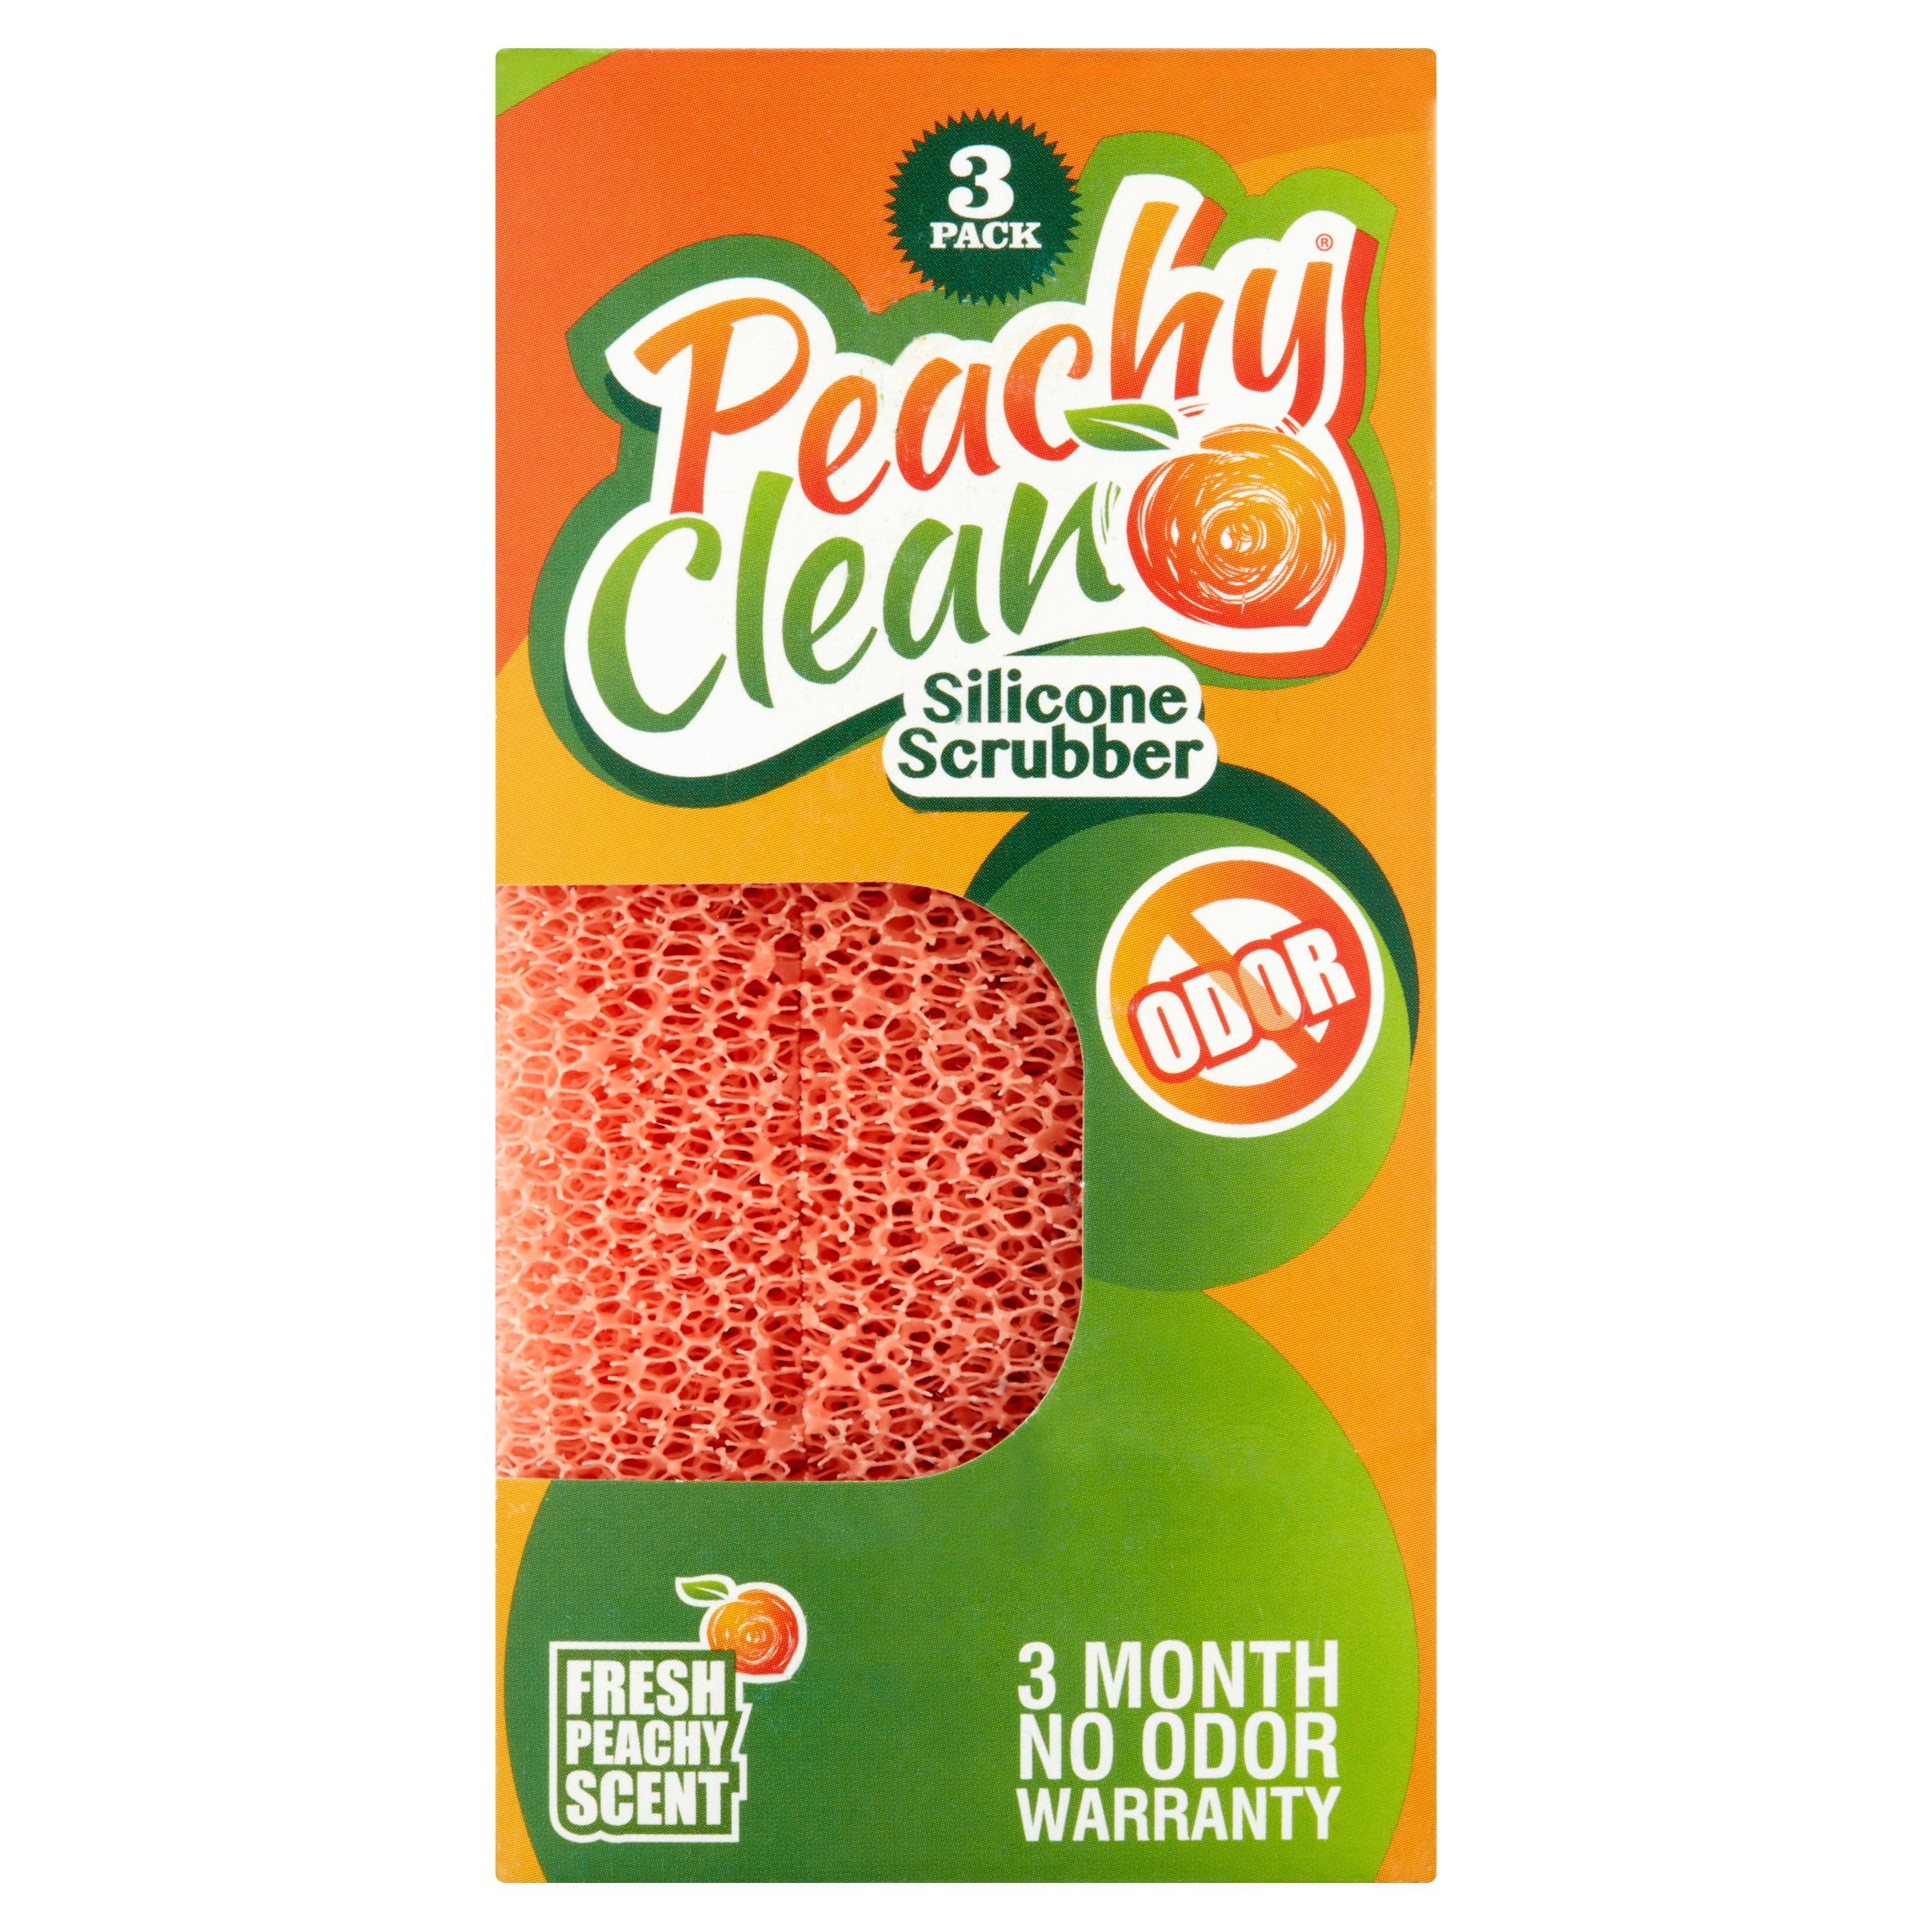 Peachy Clean Silicone Scrubbers, 3 count 